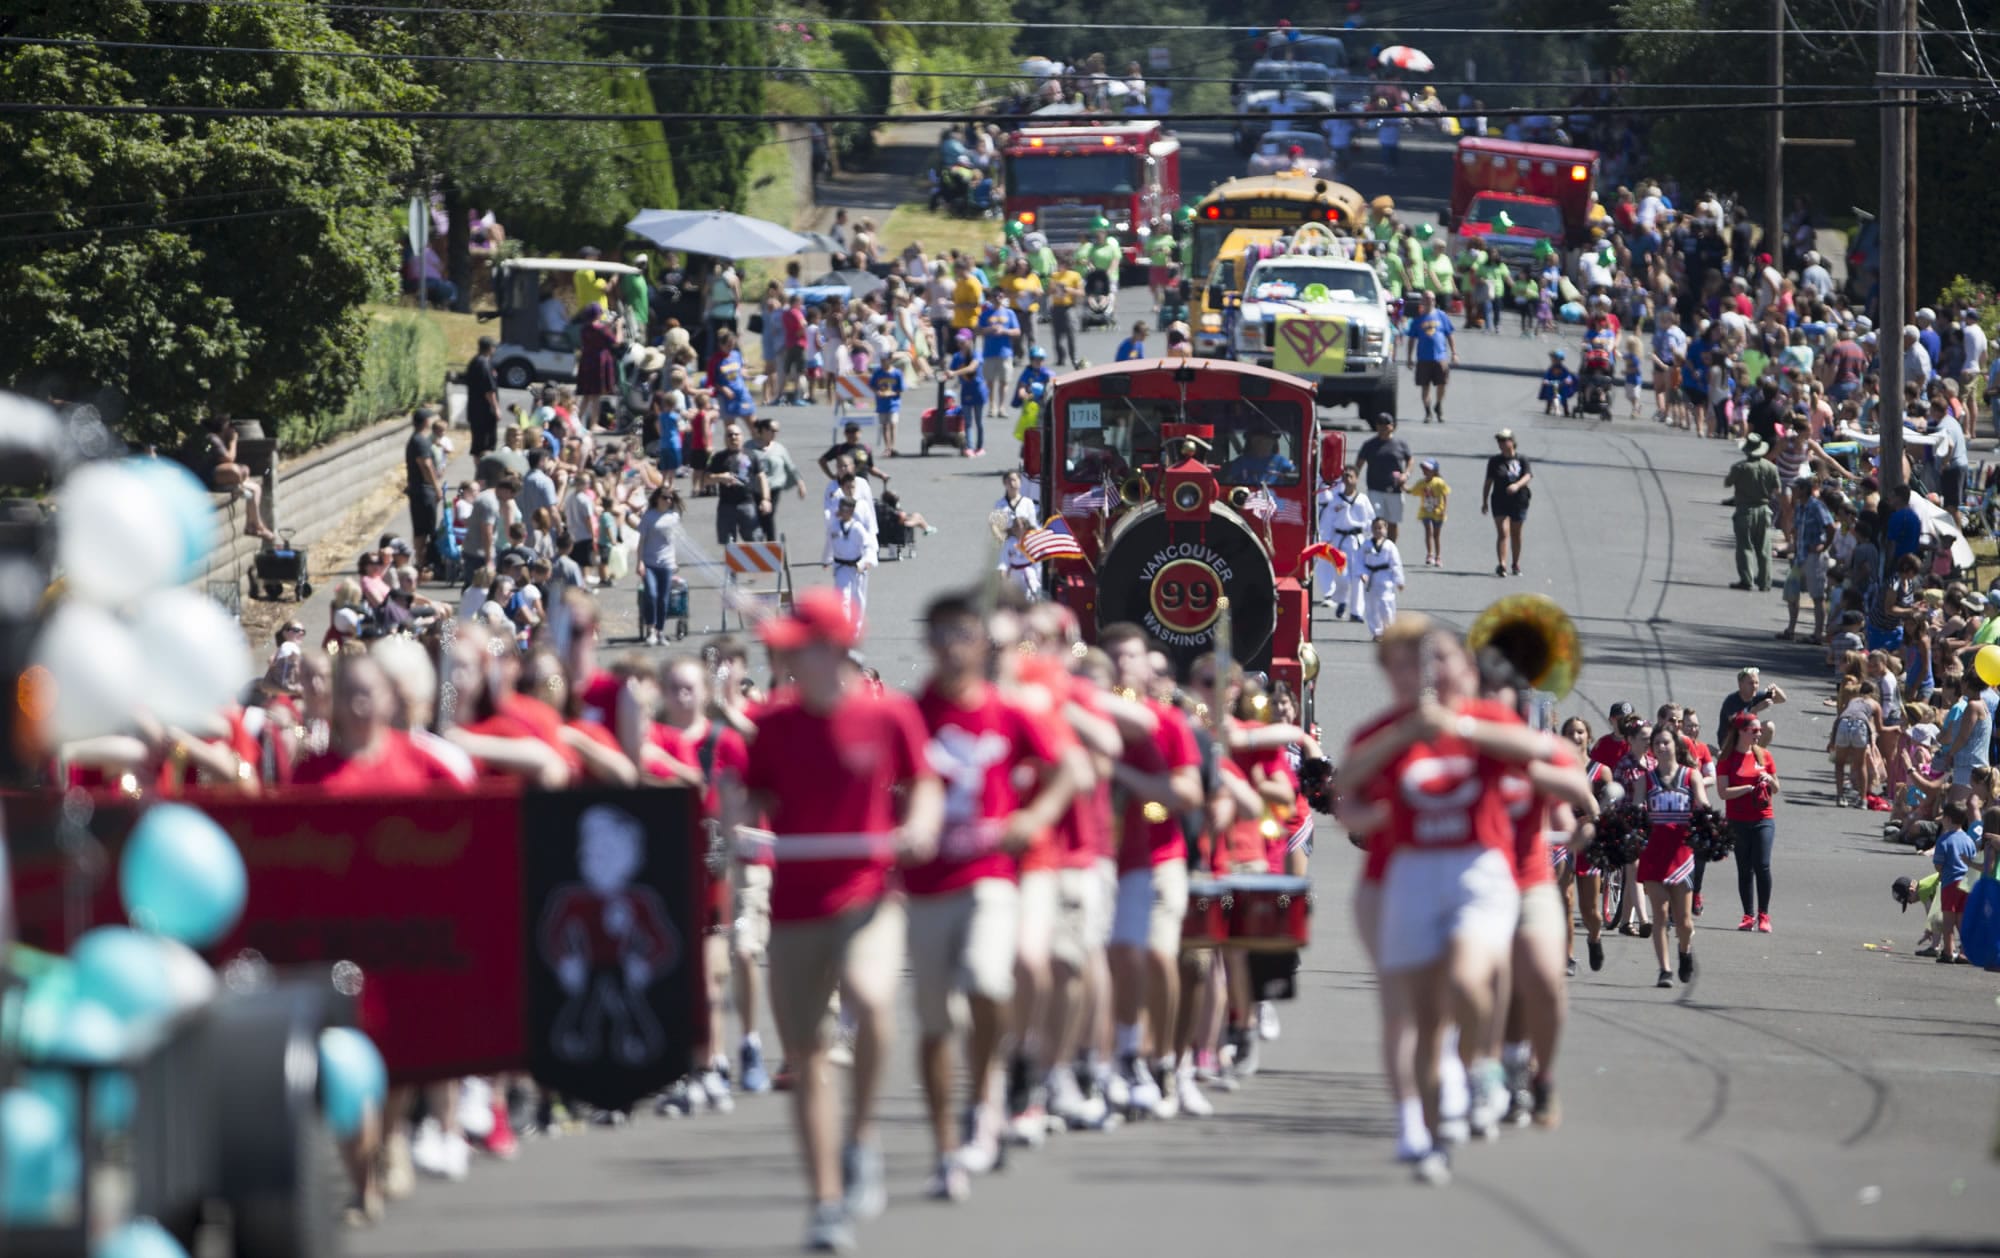 Crowds gathered for the annual Camas Days Grand Parade that was celebrating the theme of "Once Upon a Time" on Saturday. (Photos by Randy L.